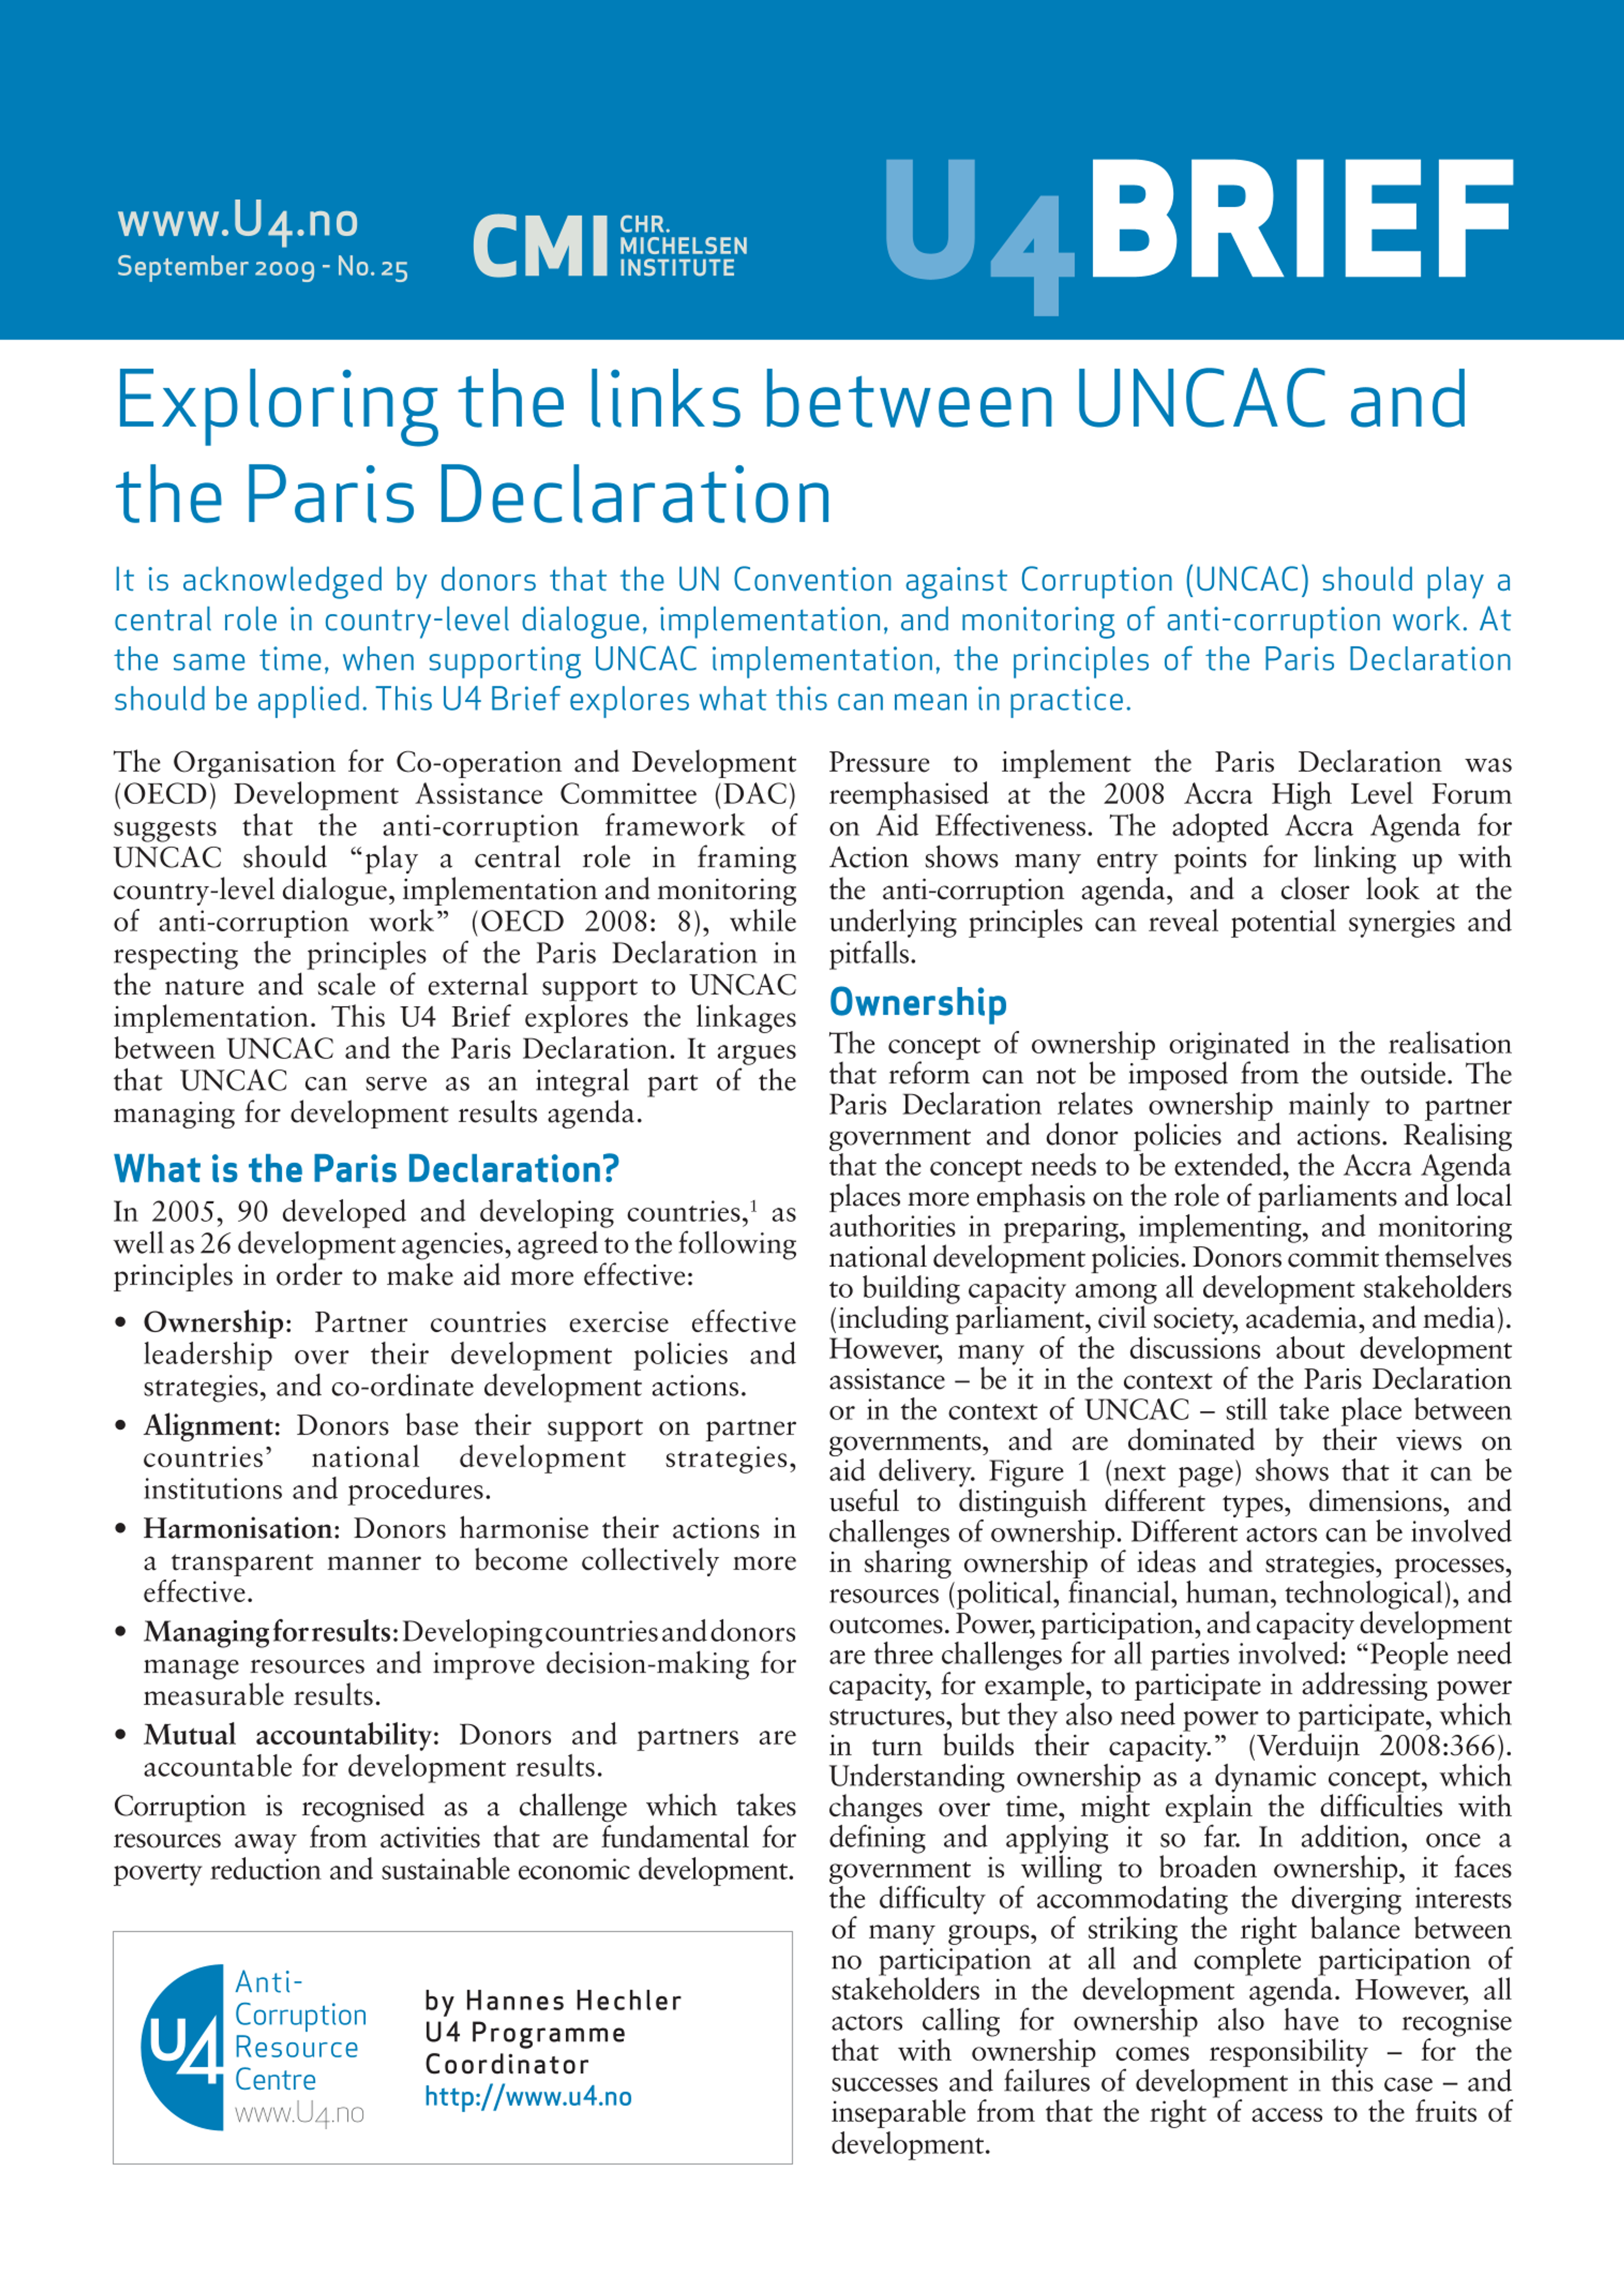 Exploring the links between UNCAC and the Paris Declaration